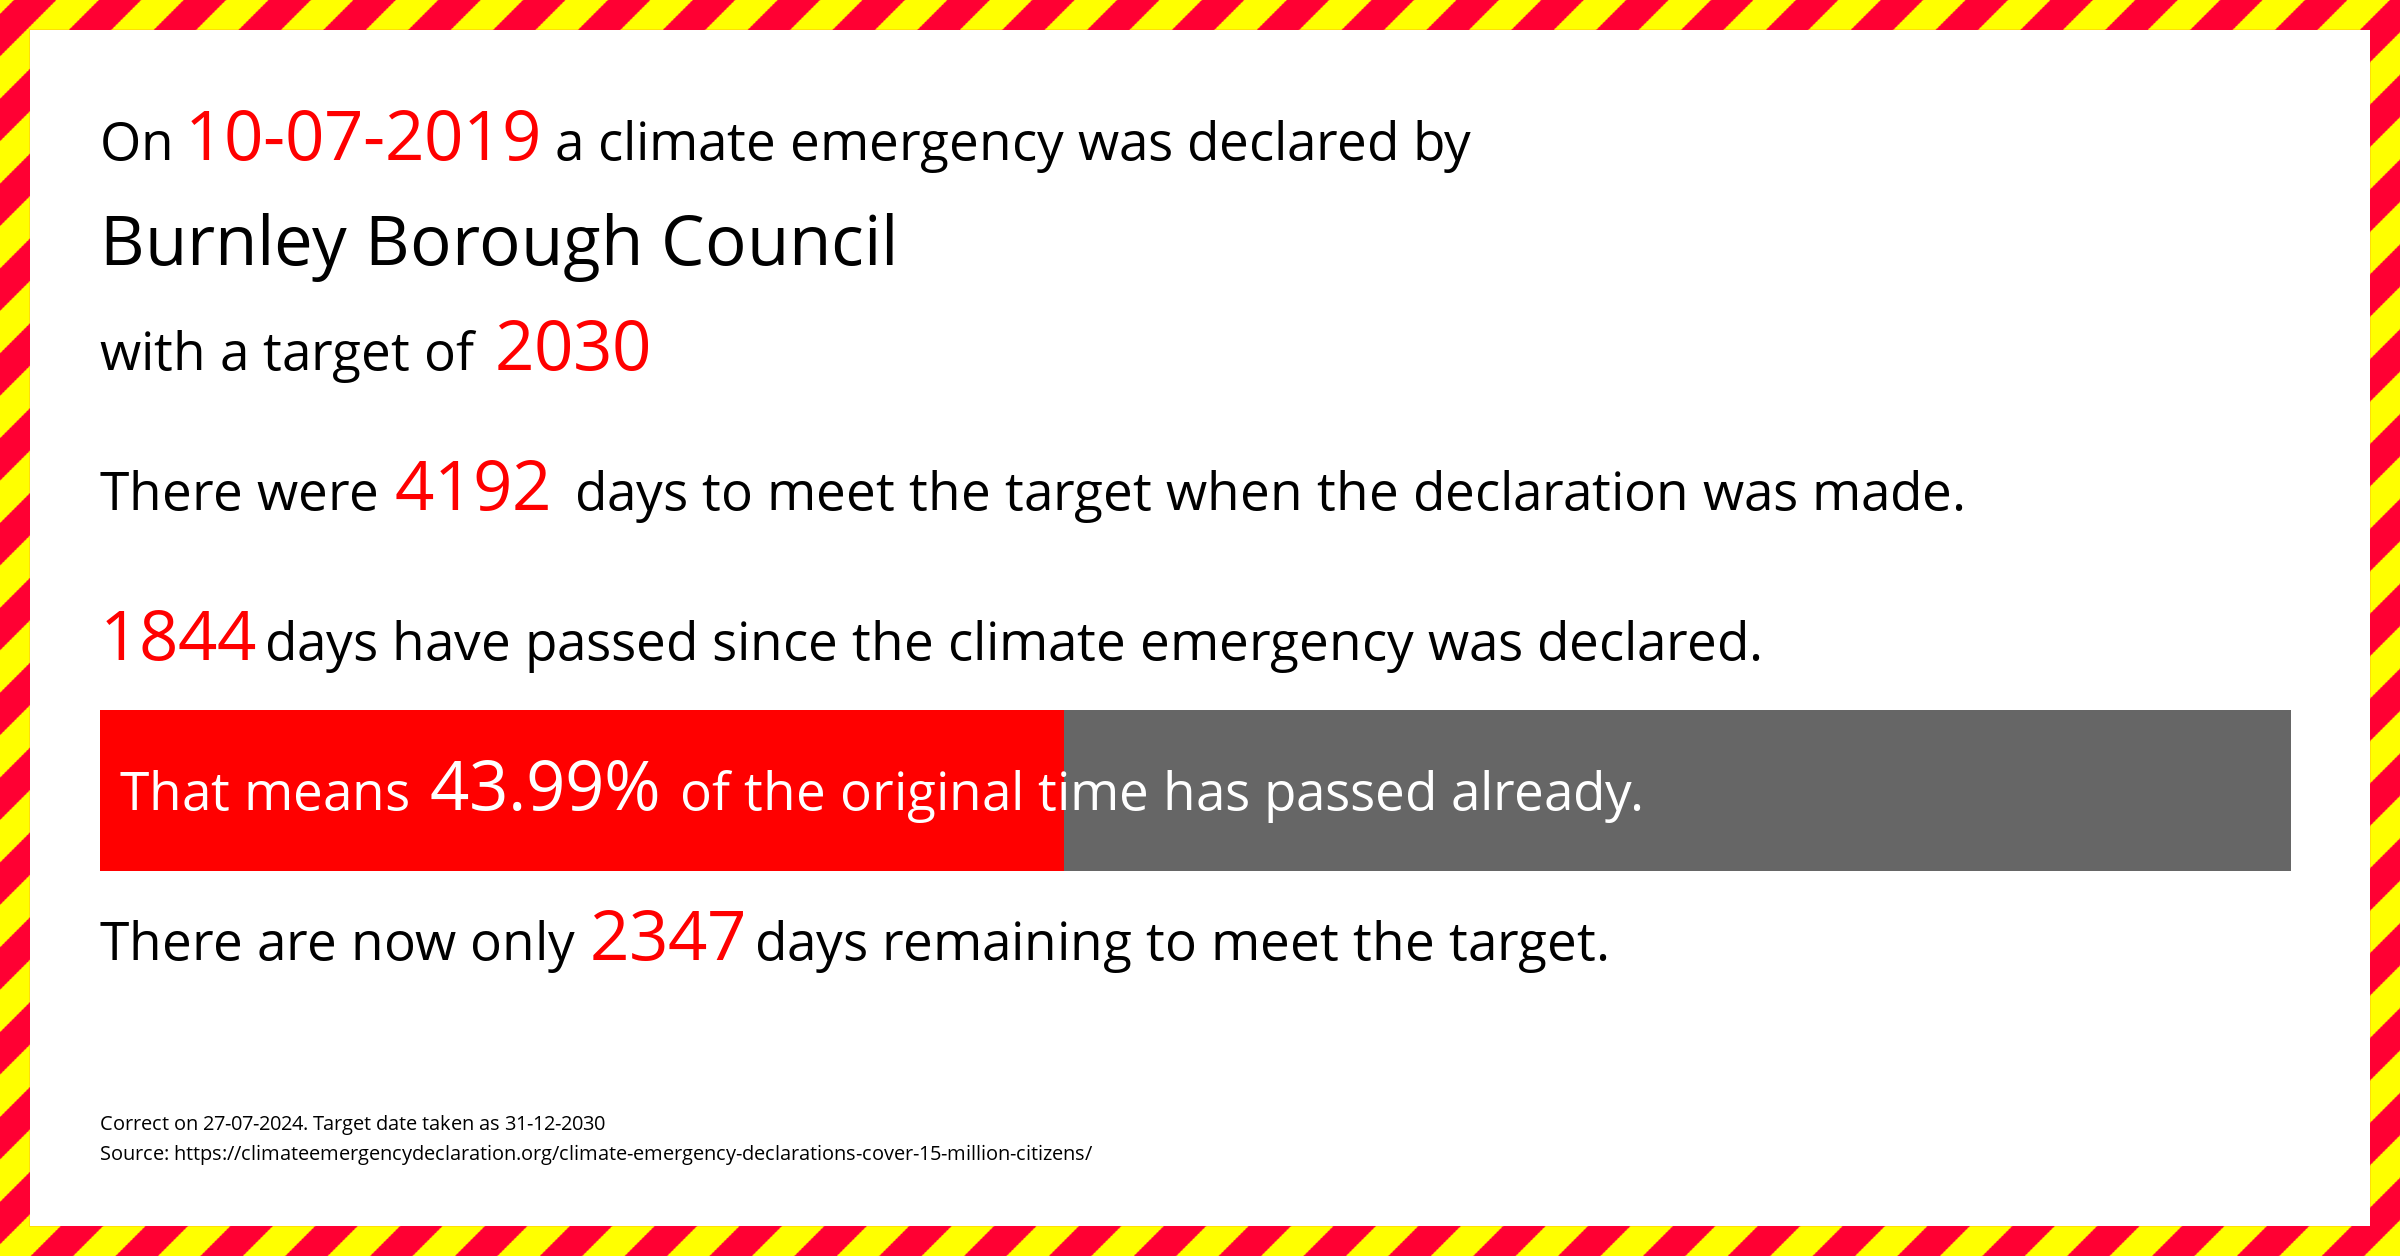 Burnley Borough Council declared a Climate emergency on Wednesday 10th July 2019, with a target of 2030.